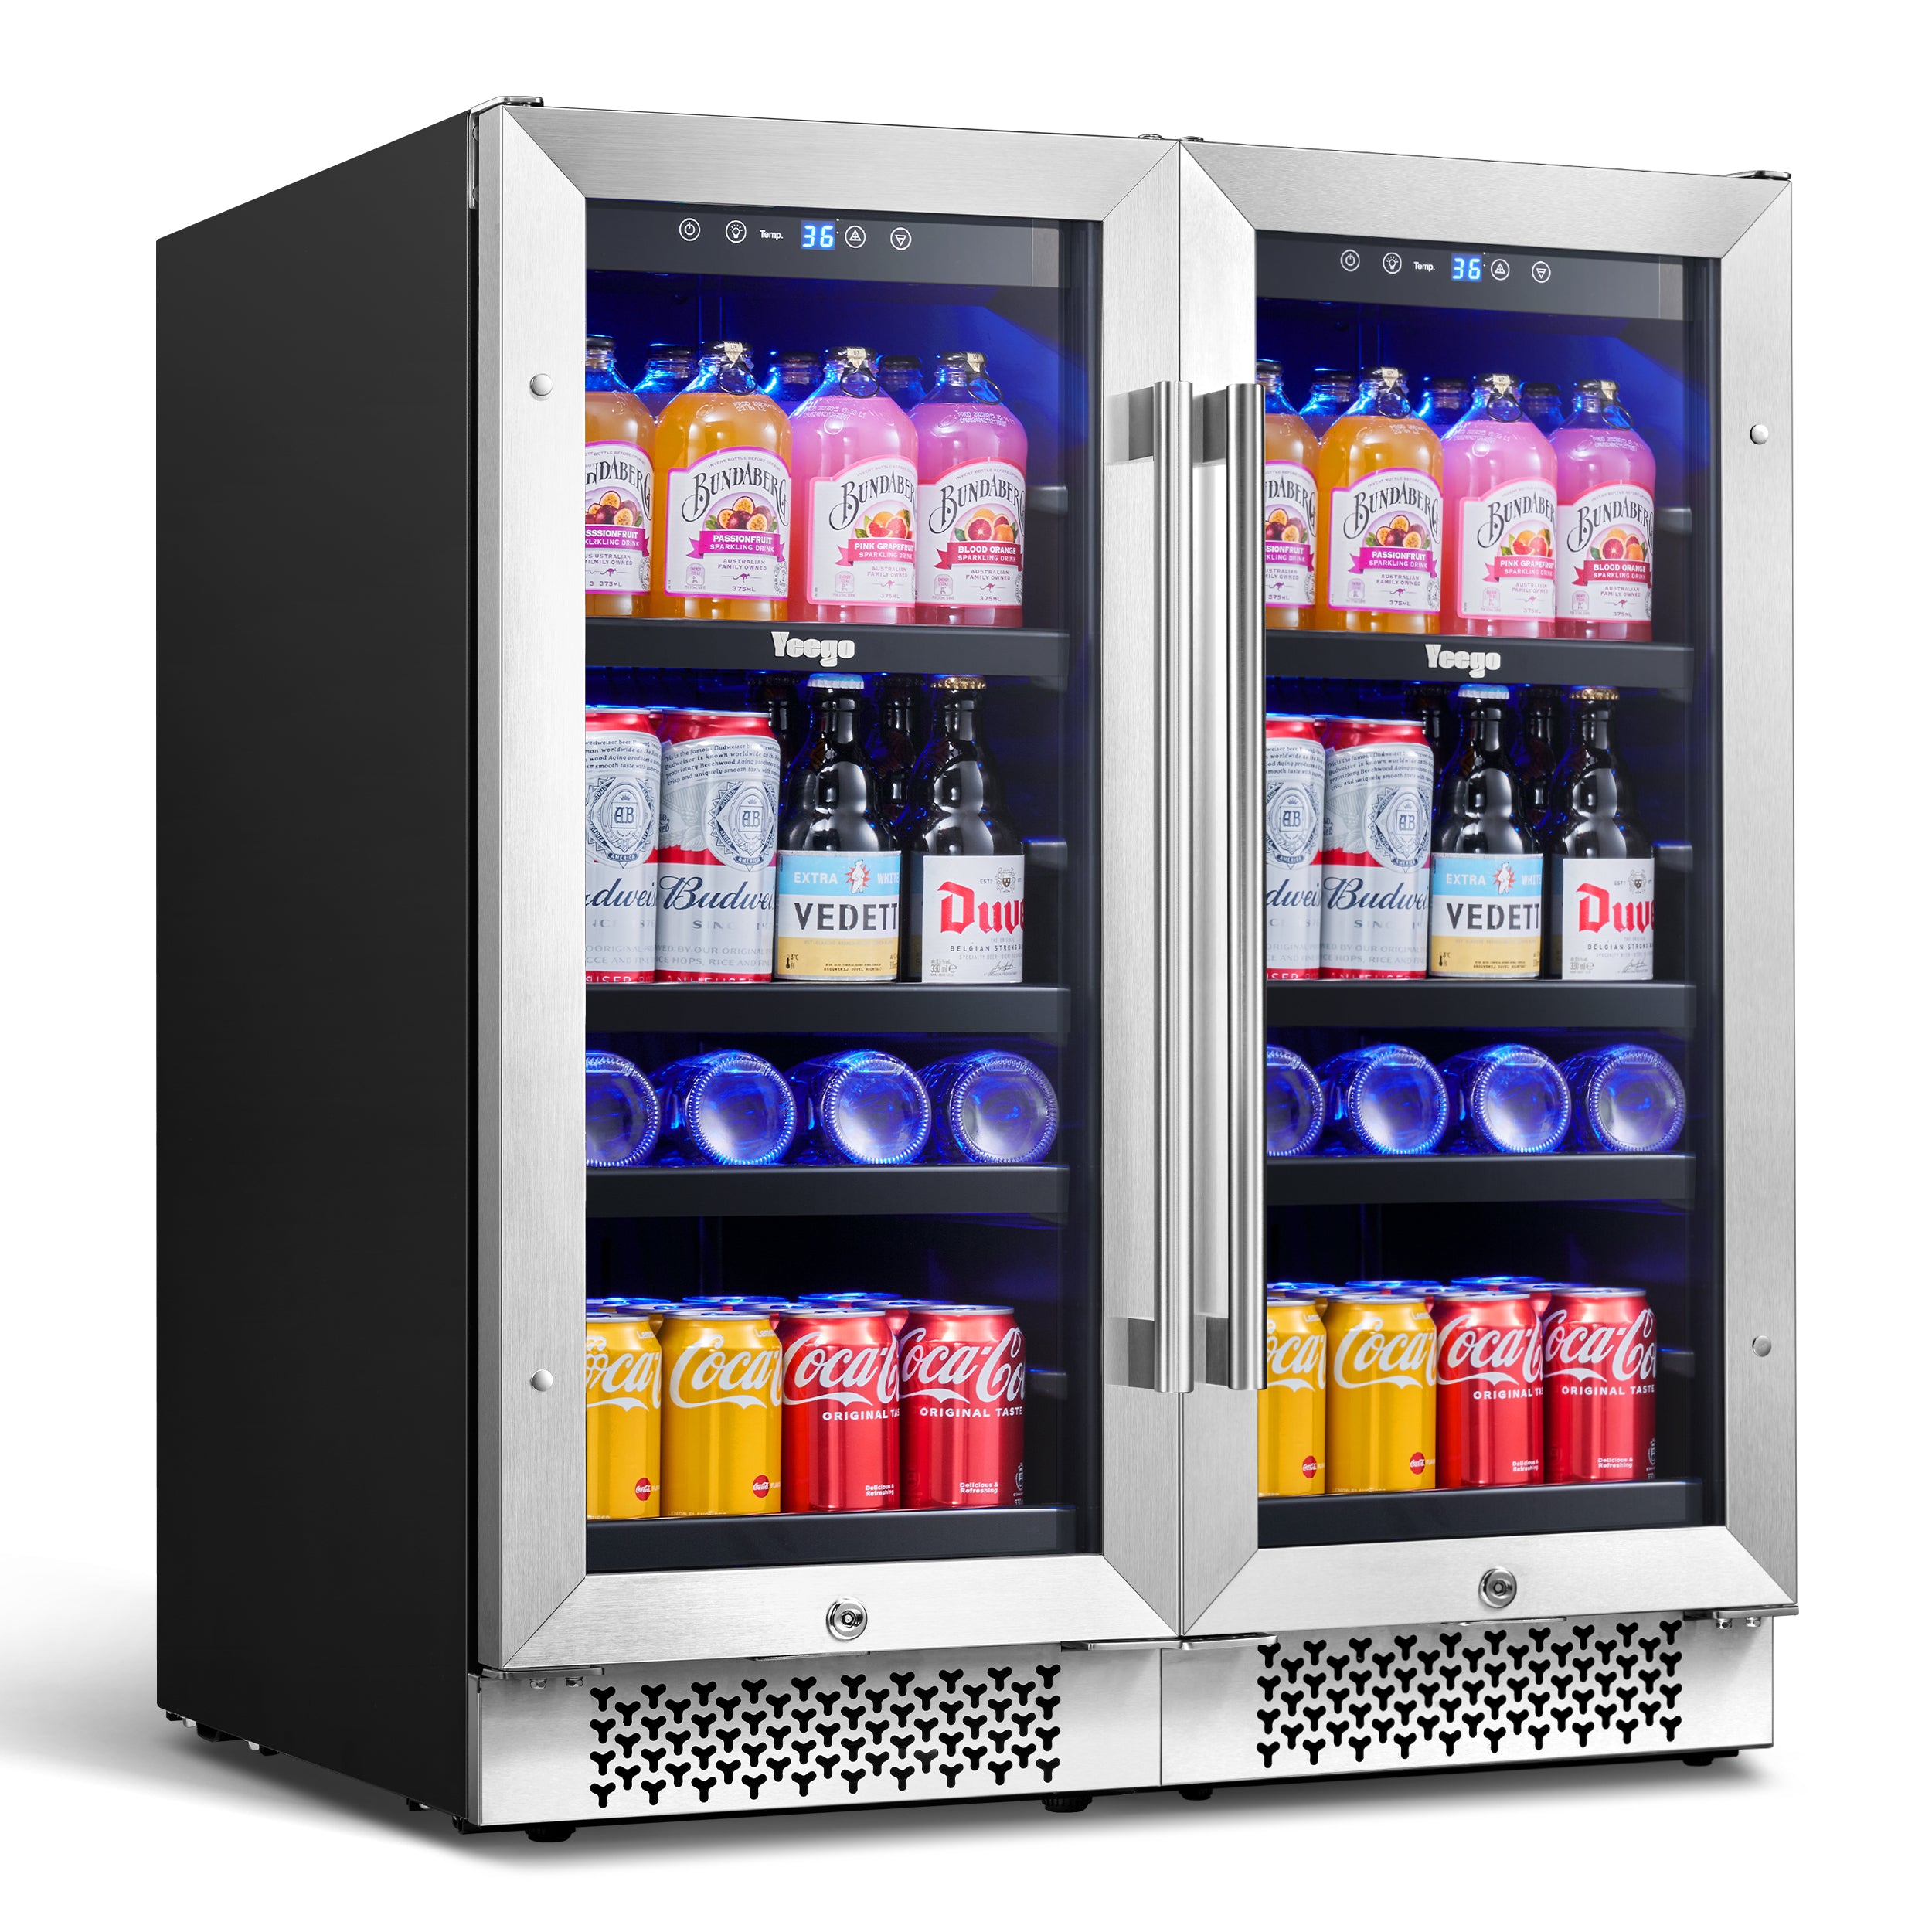 30 Inch Wide Dual Zone Beverage Cooler Combo, 160 Cans Capacity Drink Fridge, Under Counter or Freestanding